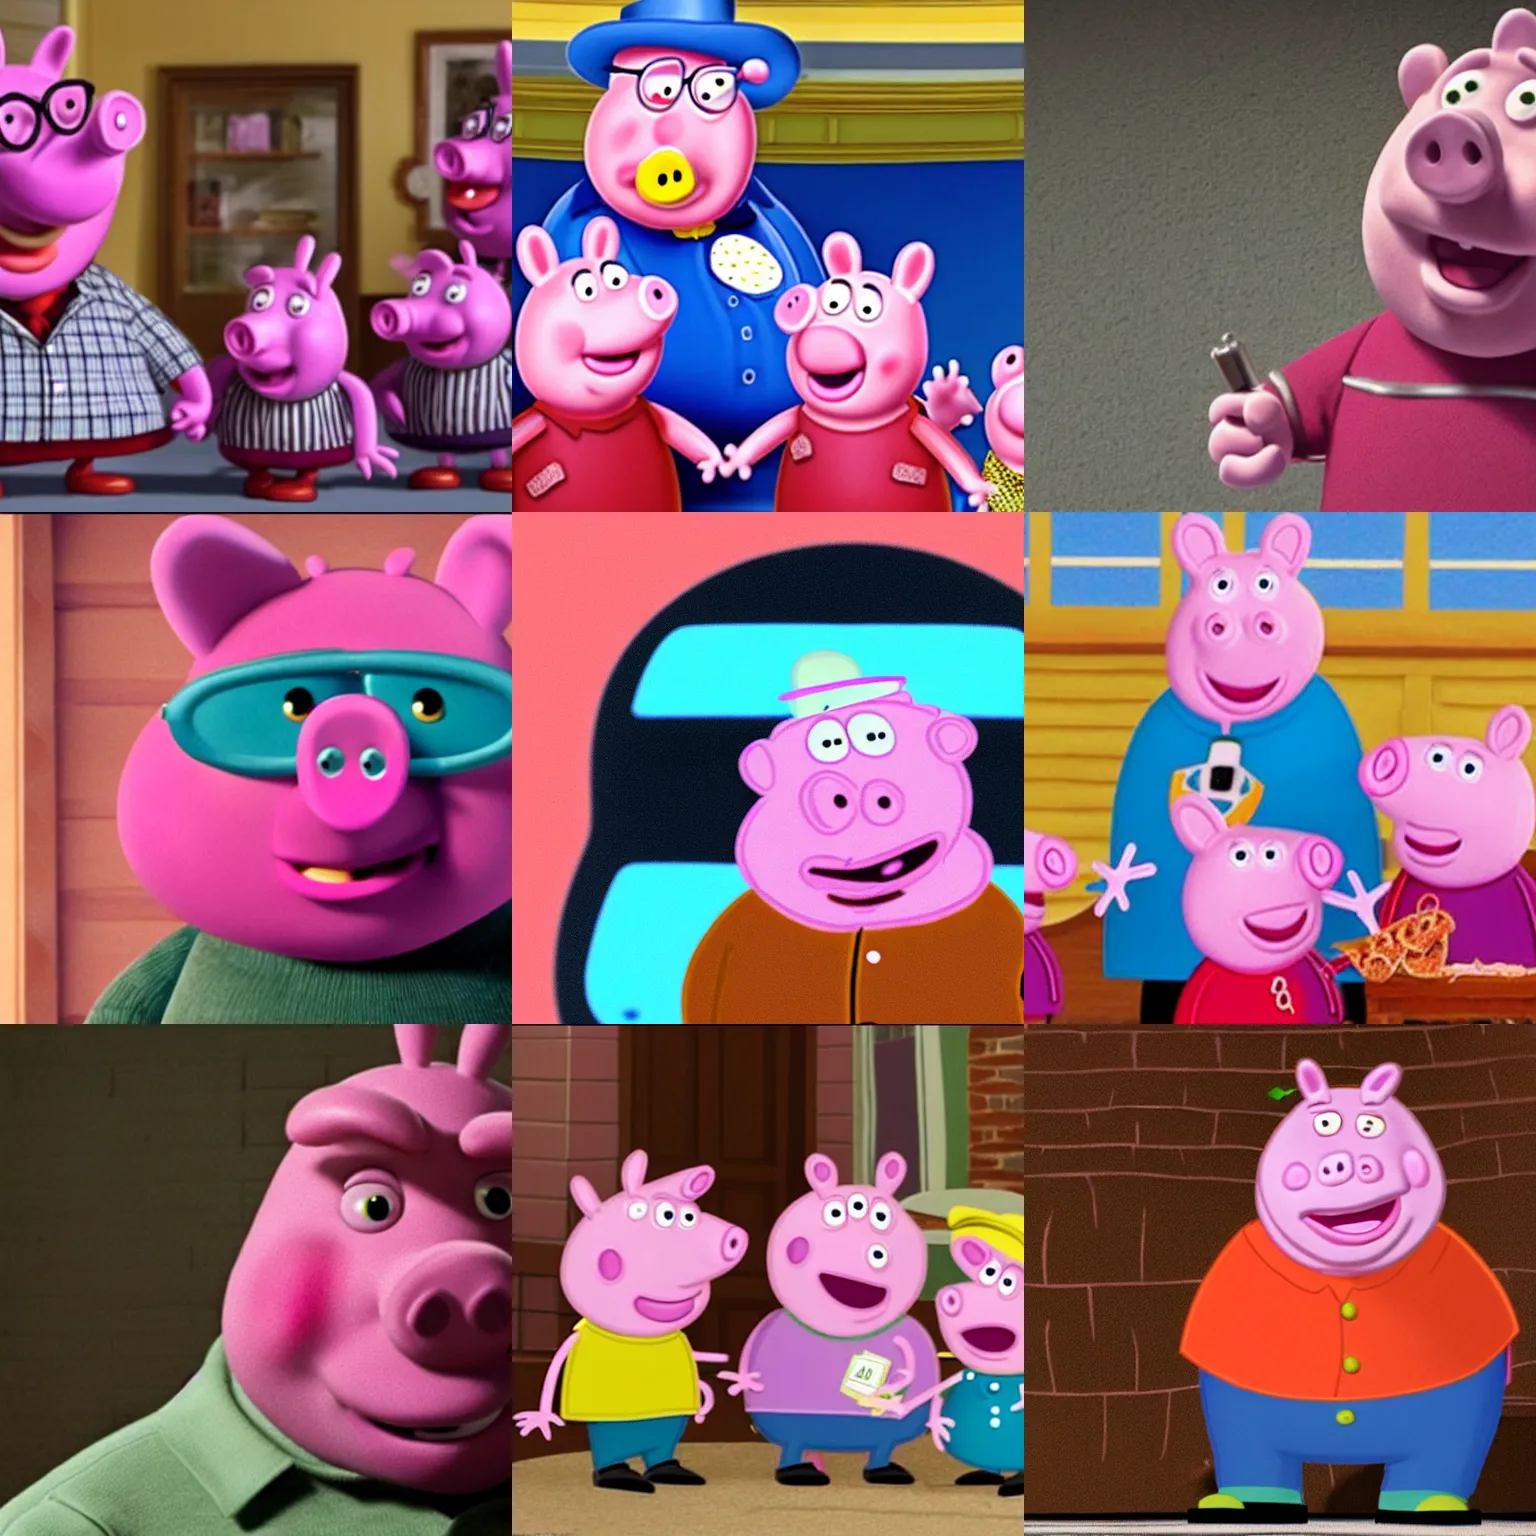 Prompt: james gandolfini as daddy pig from peppa pig, detailed still from film trailer